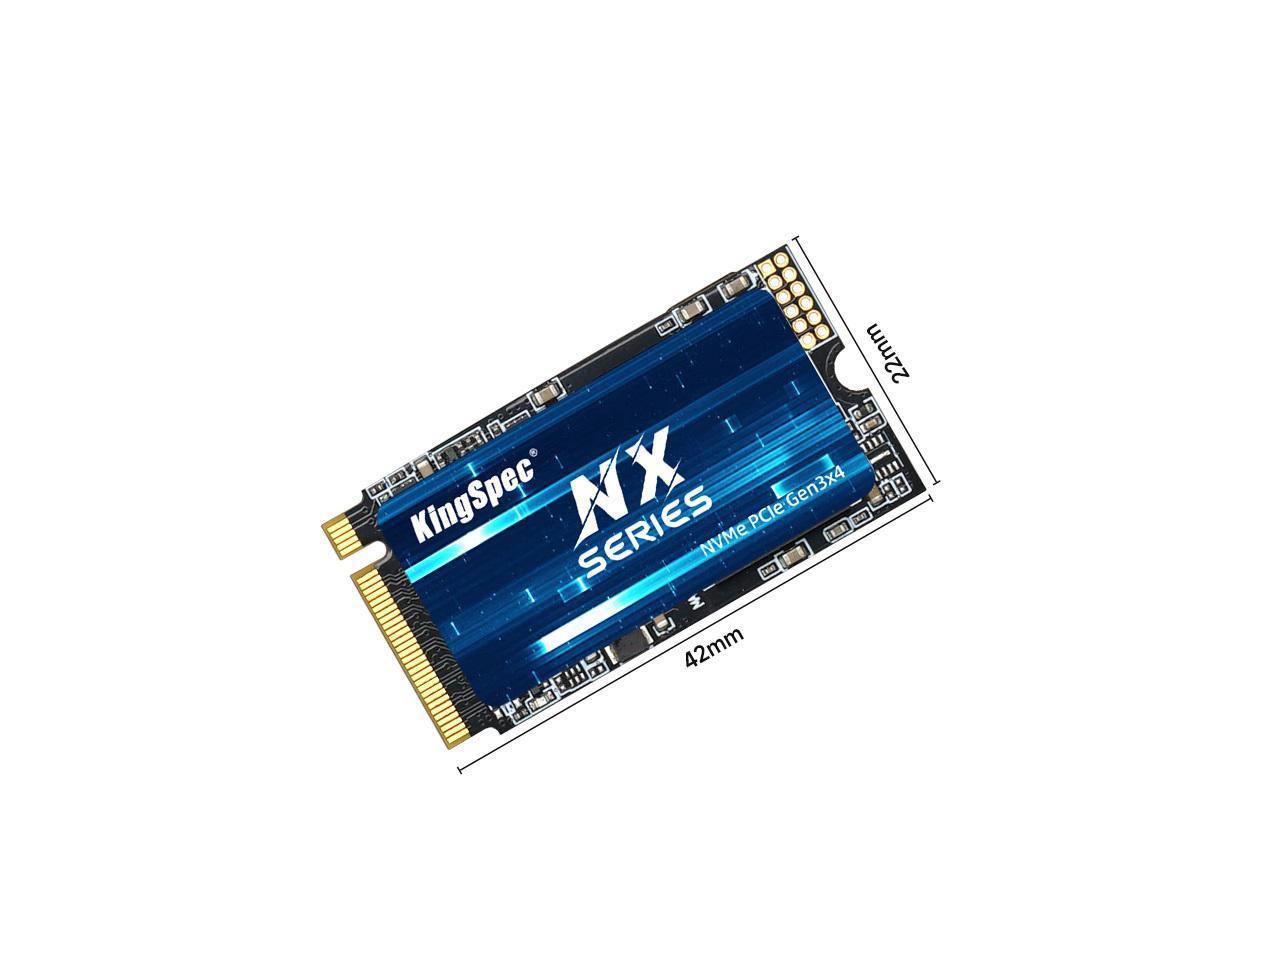 The KingSpec Solid State Drive NX Series 1 TB M.2 2242 PCIe 3.0 x 